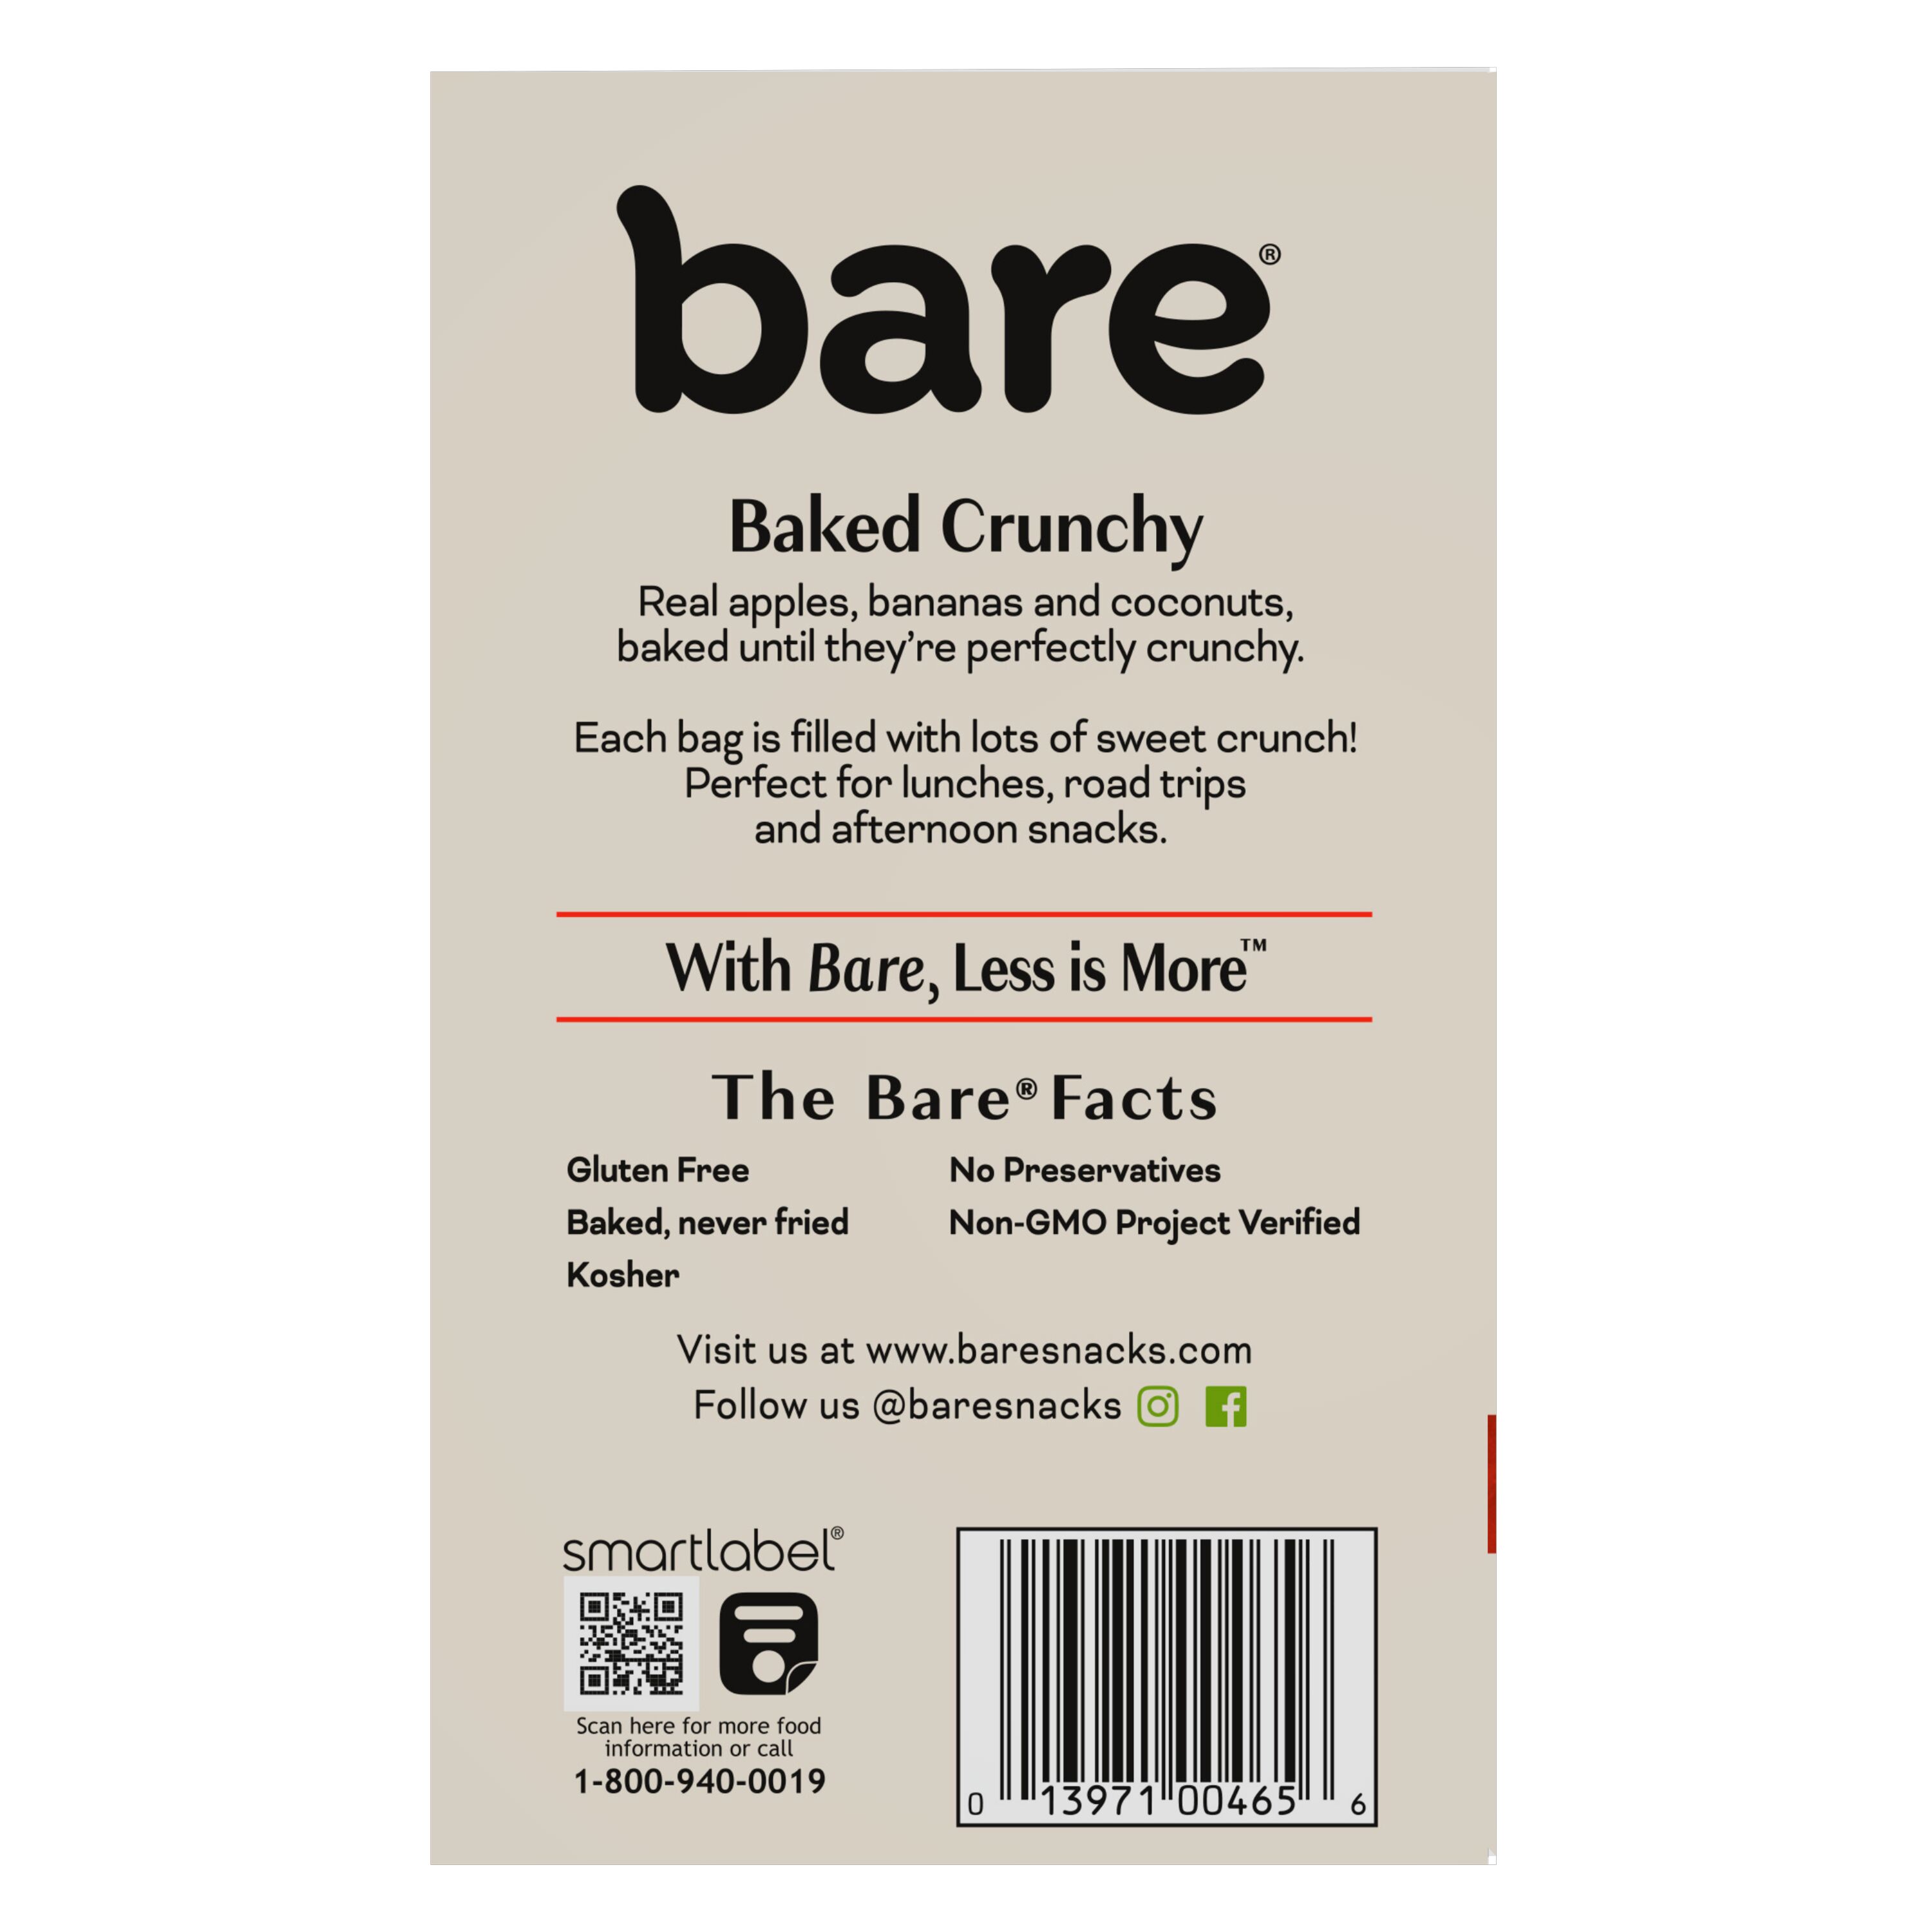 Bare, Baked Crunchy Fruit Chips Snack Pack, 0.53 oz Bags, 7 Count - image 5 of 12